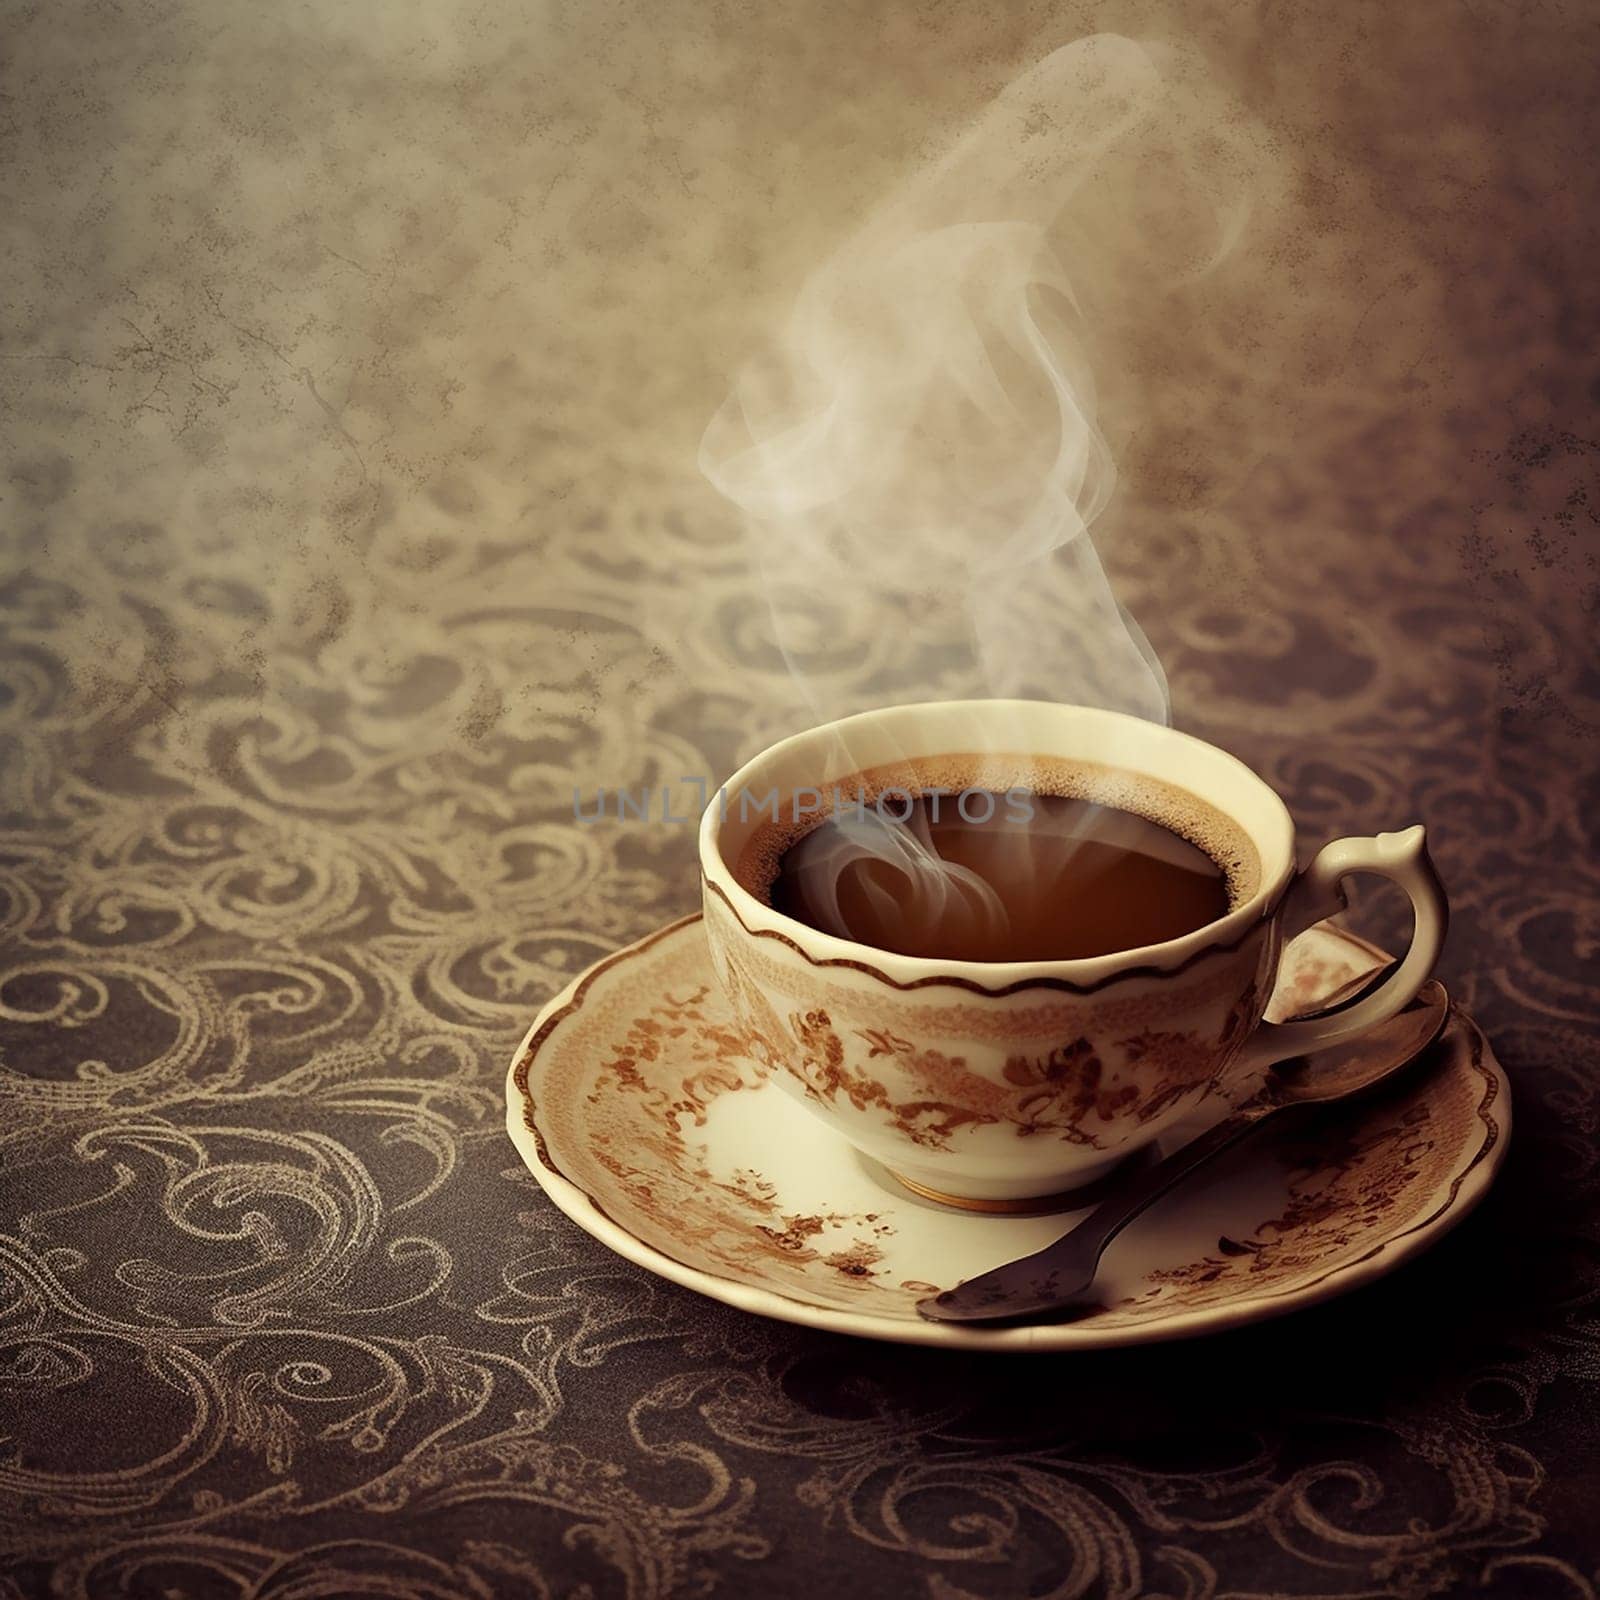 Steaming hot coffee in a vintage patterned cup on a textured background.